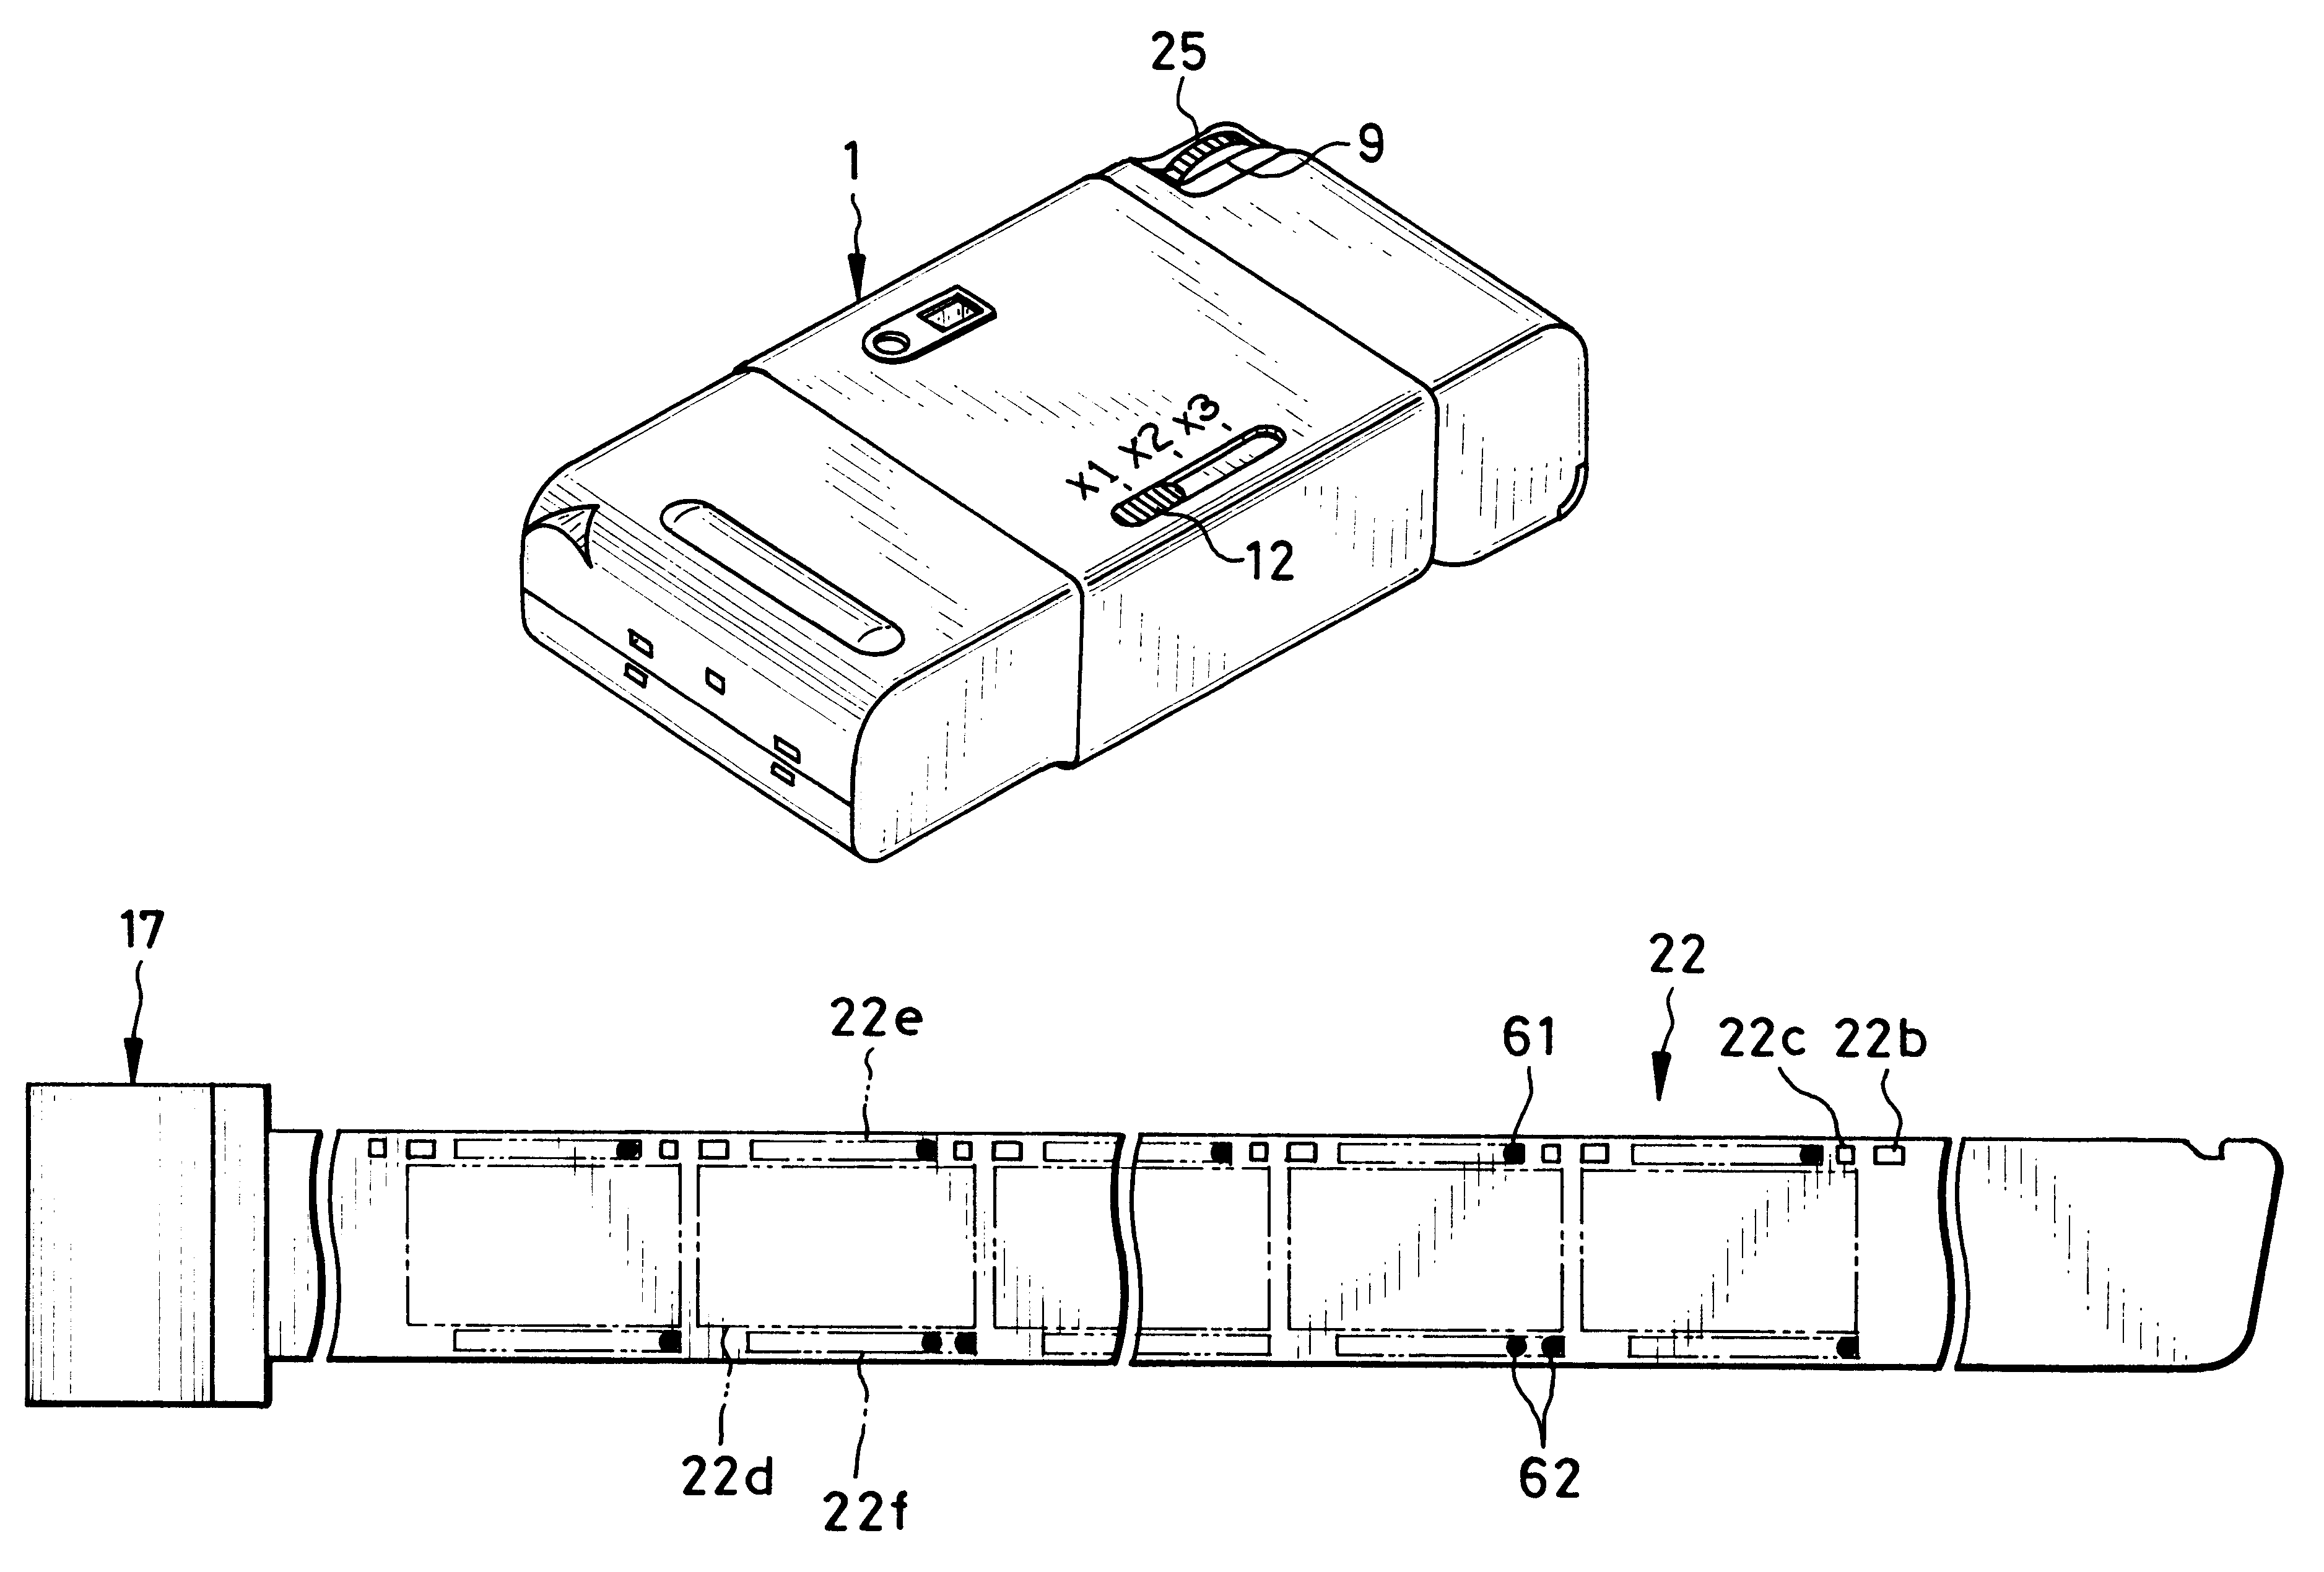 Lens-fitted photo film unit and method of producing photographic print